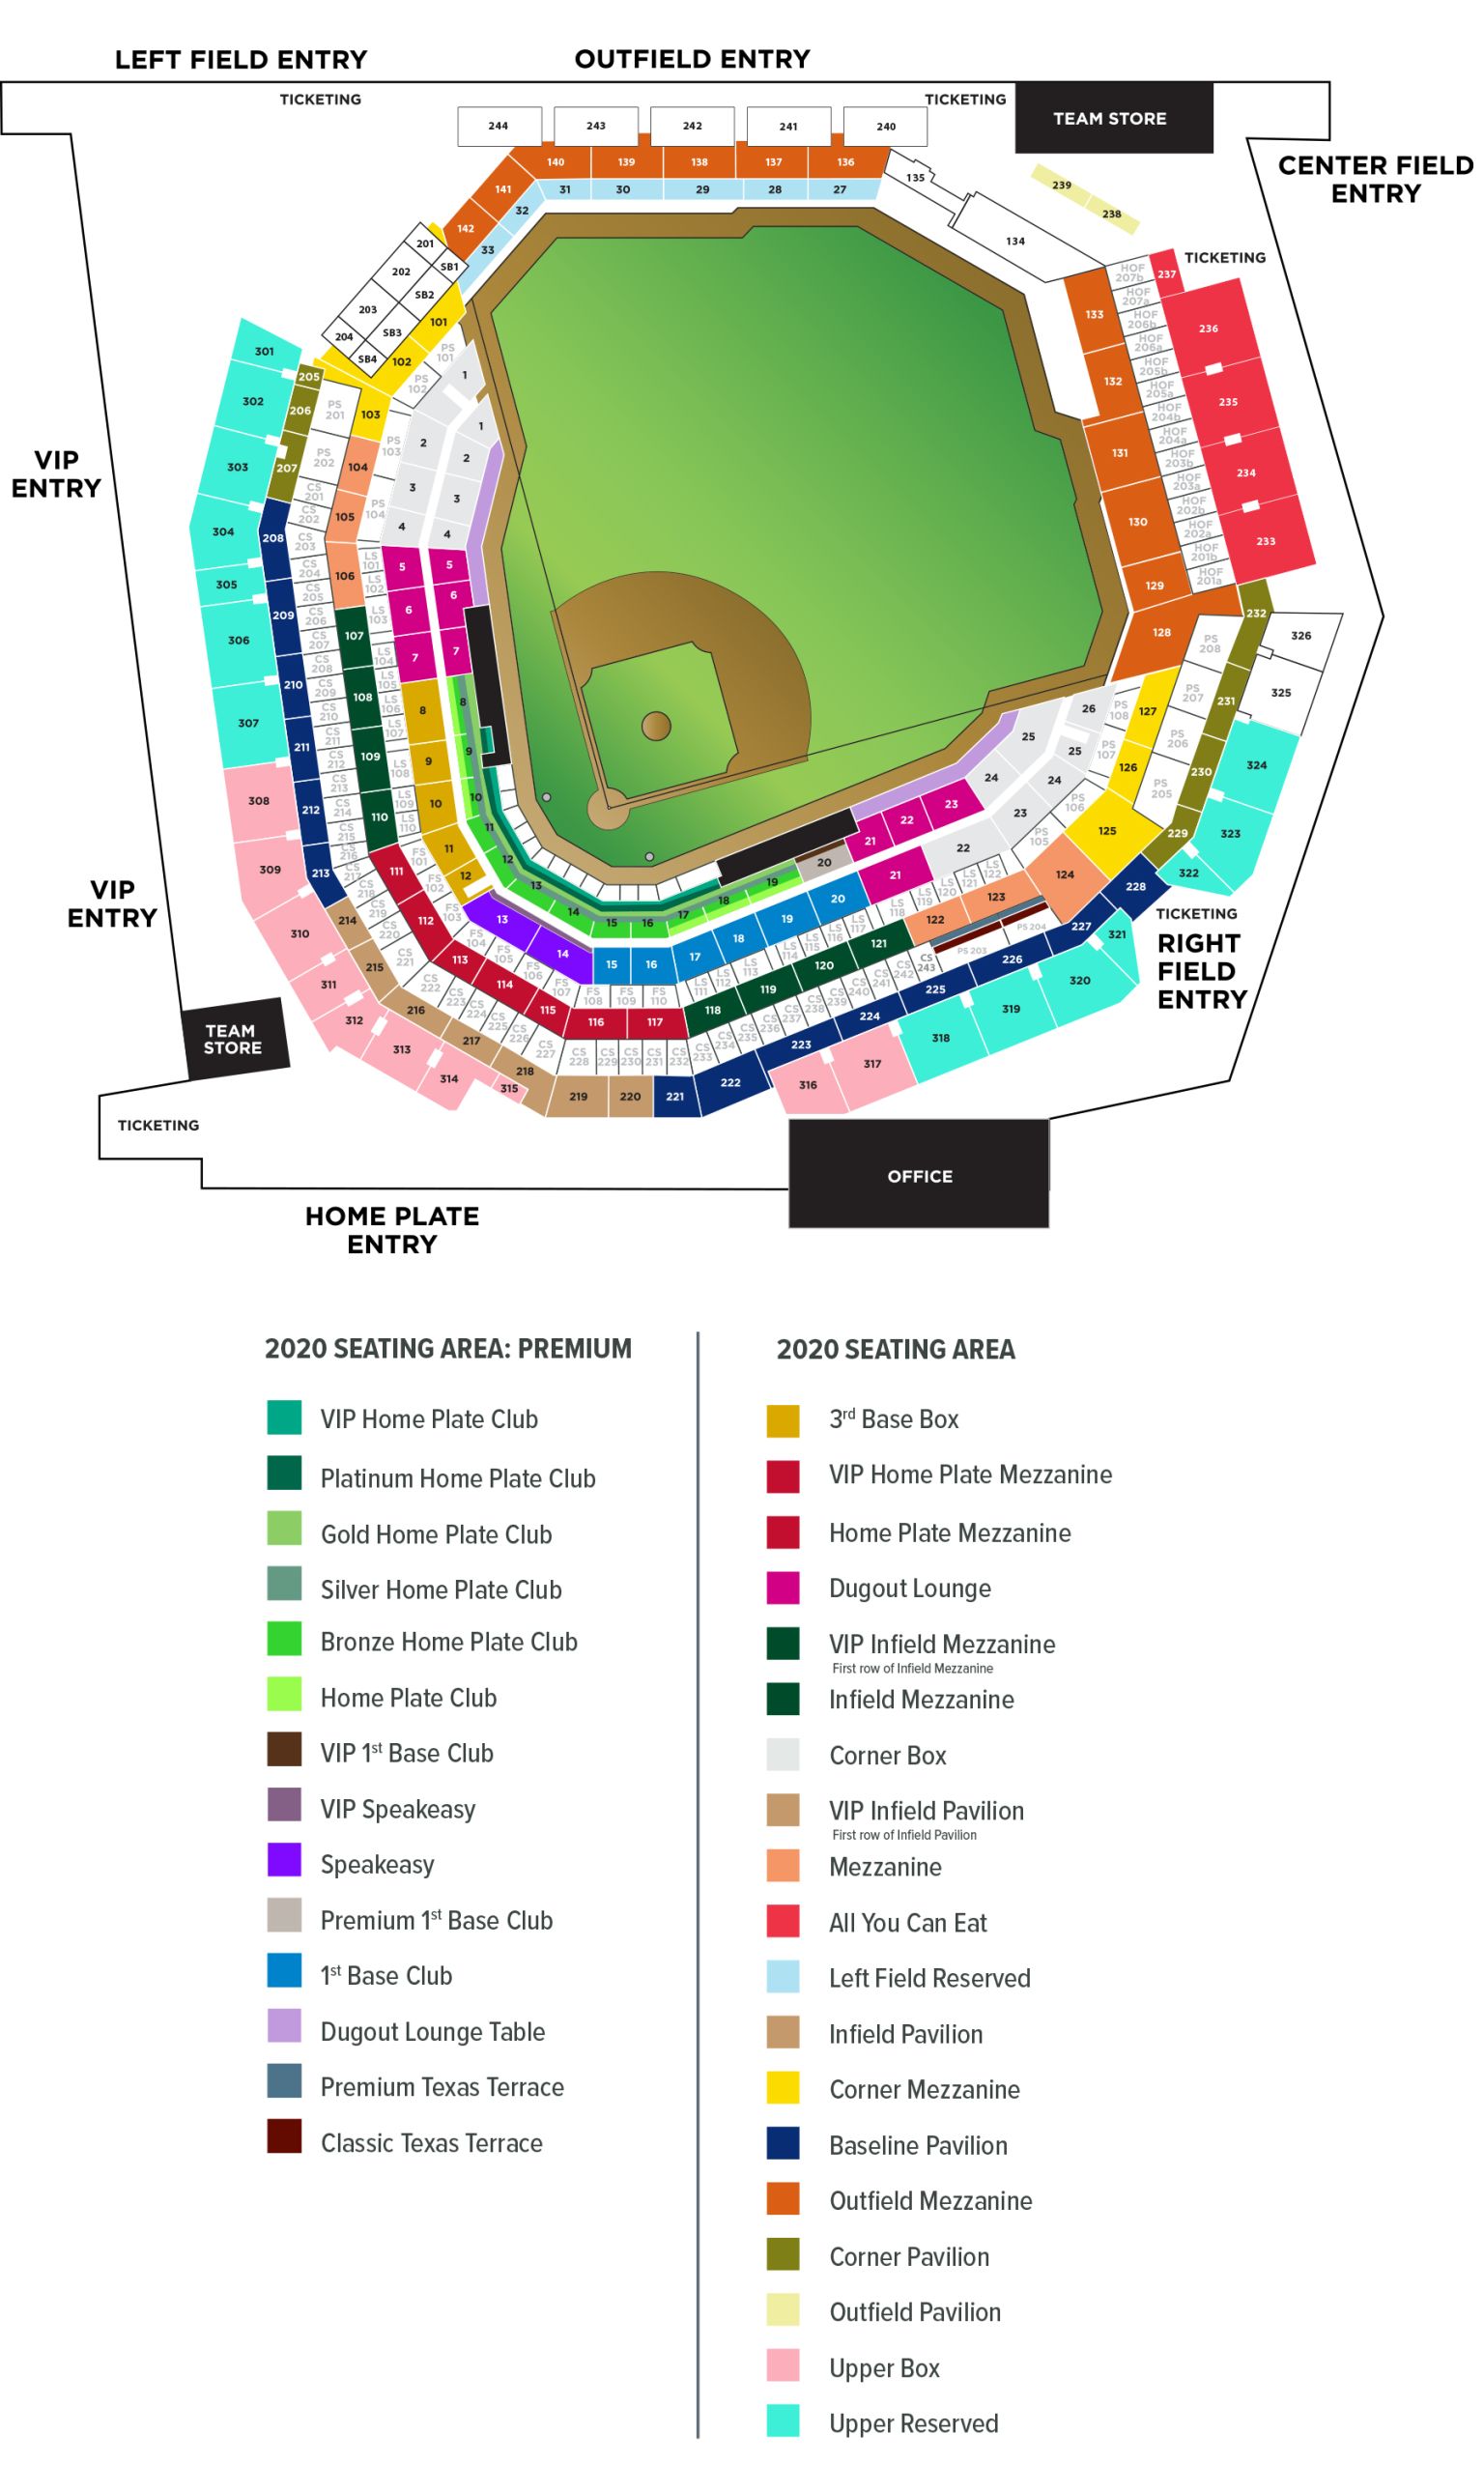 Guaranteed Rate Field, Chicago IL - Seating Chart View